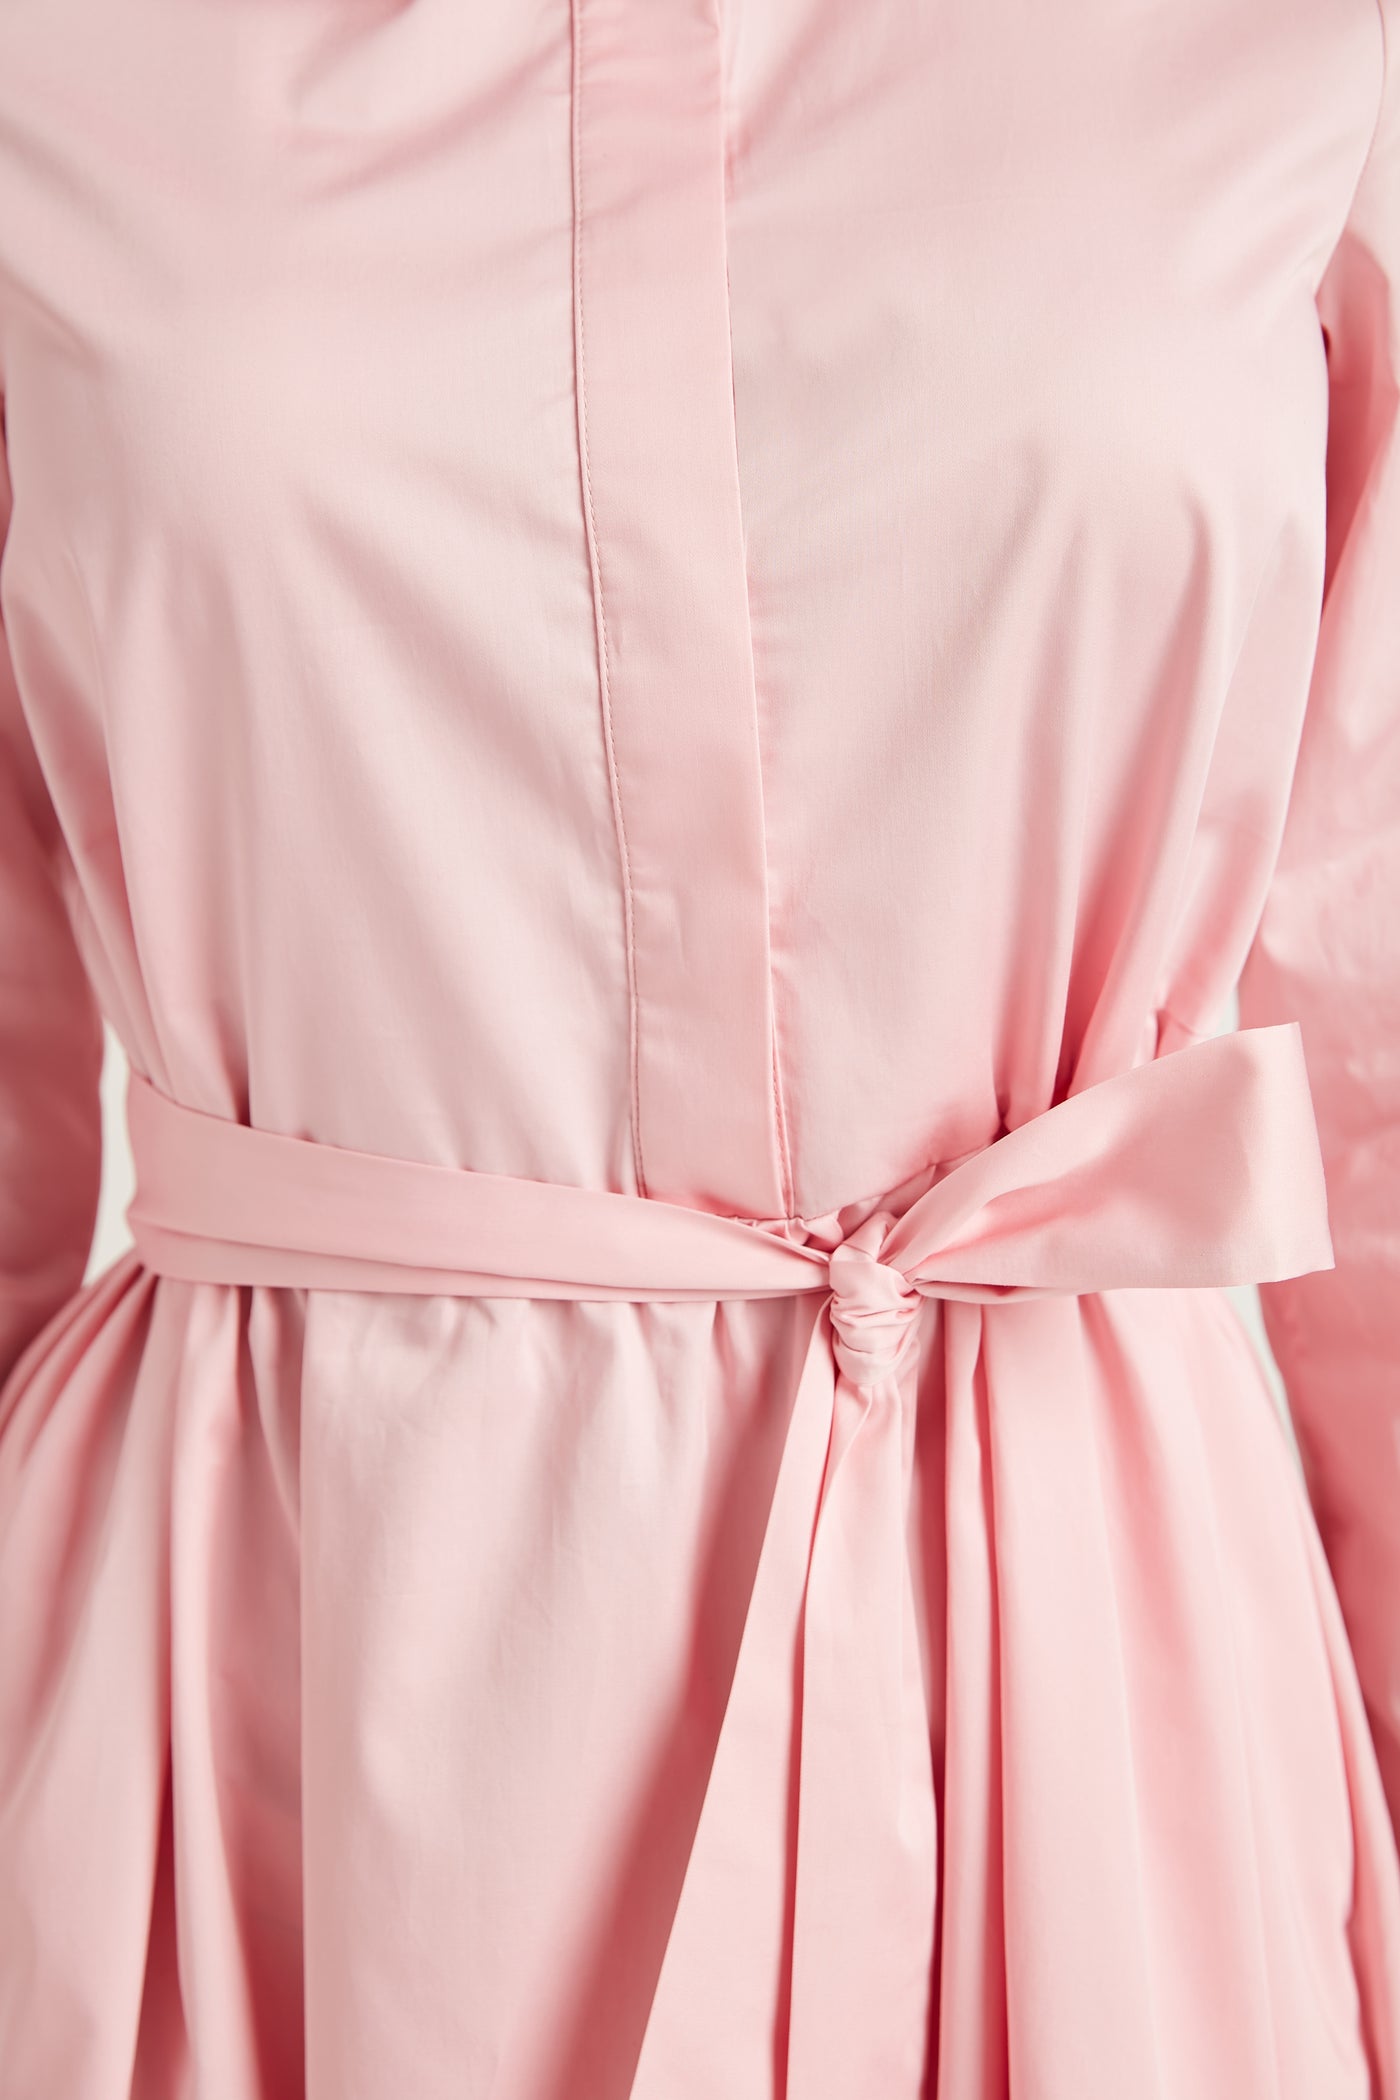 Cotton Pink Belted Maxi Dress With Pocket